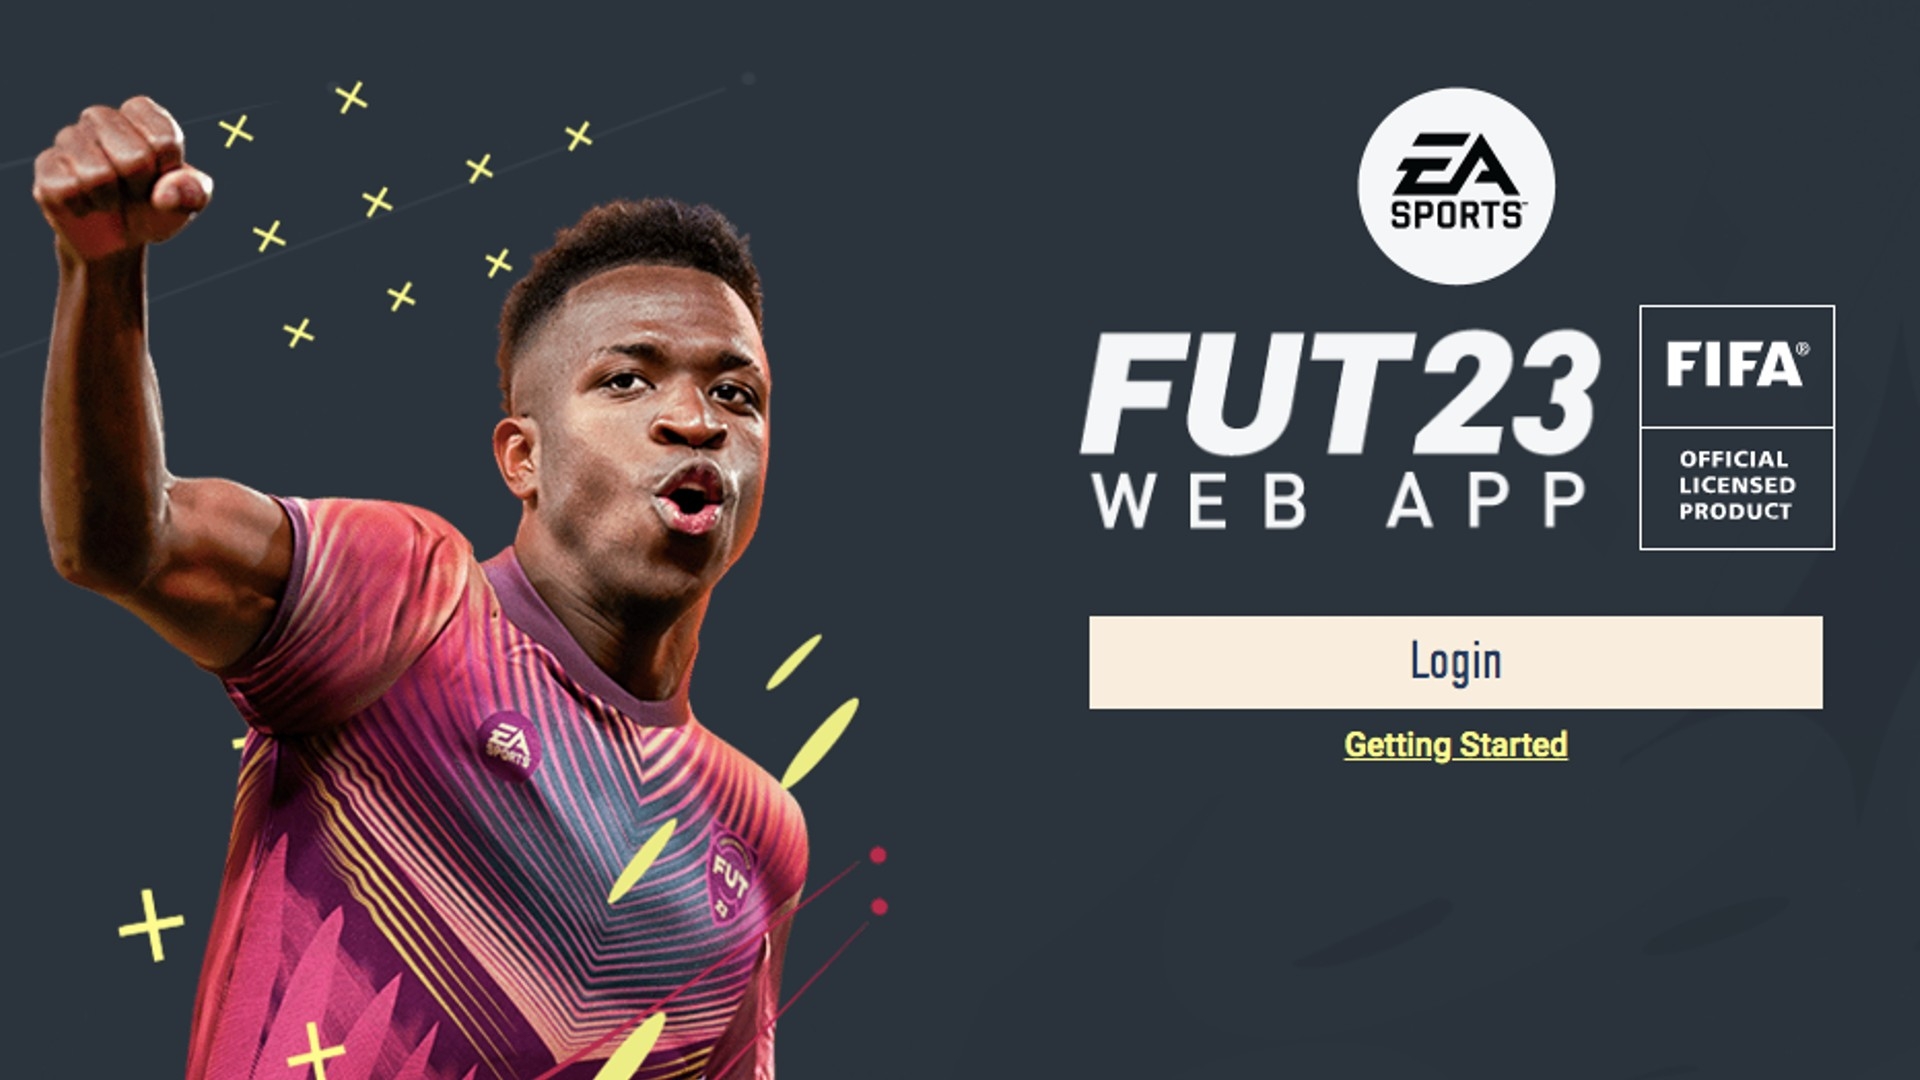 FIFA 23 Web App: Everything you need to know about how to get started early on FUT 23